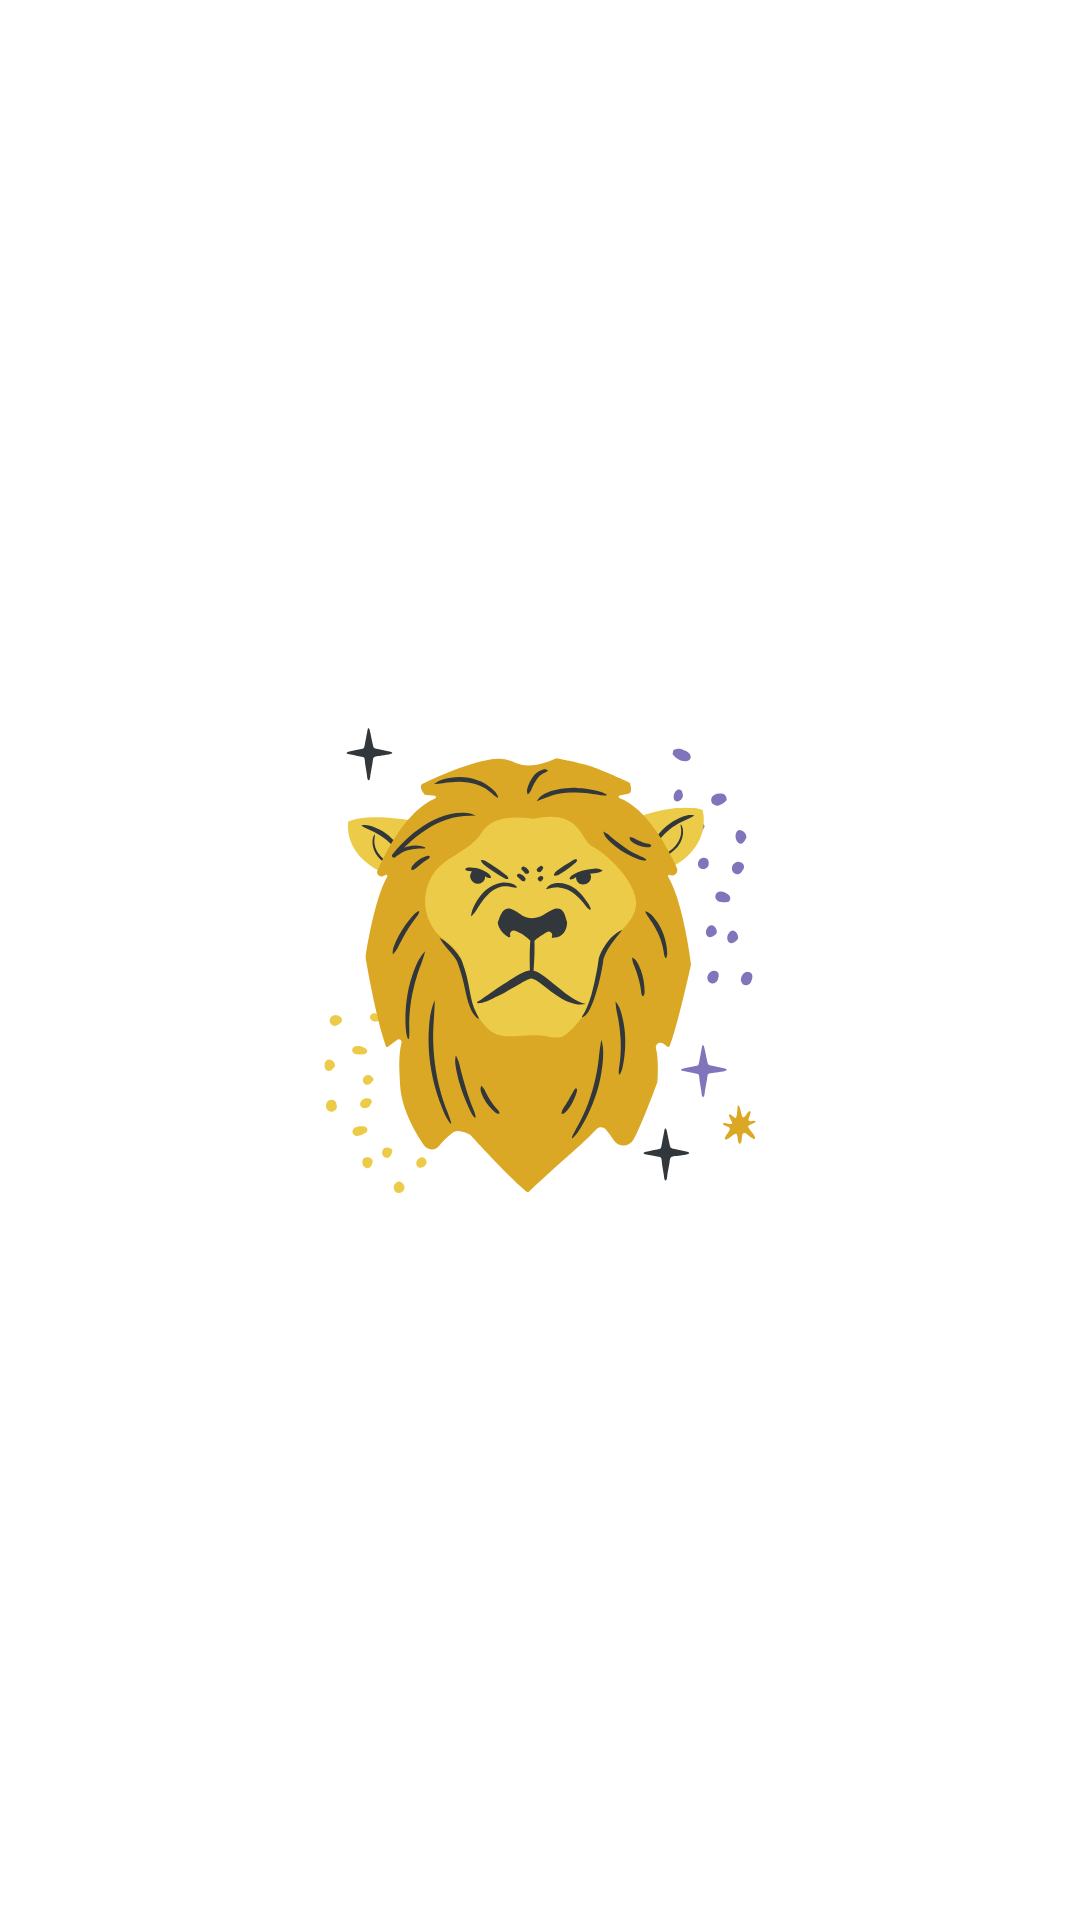 A lion head with a mane and small stars around it - Leo